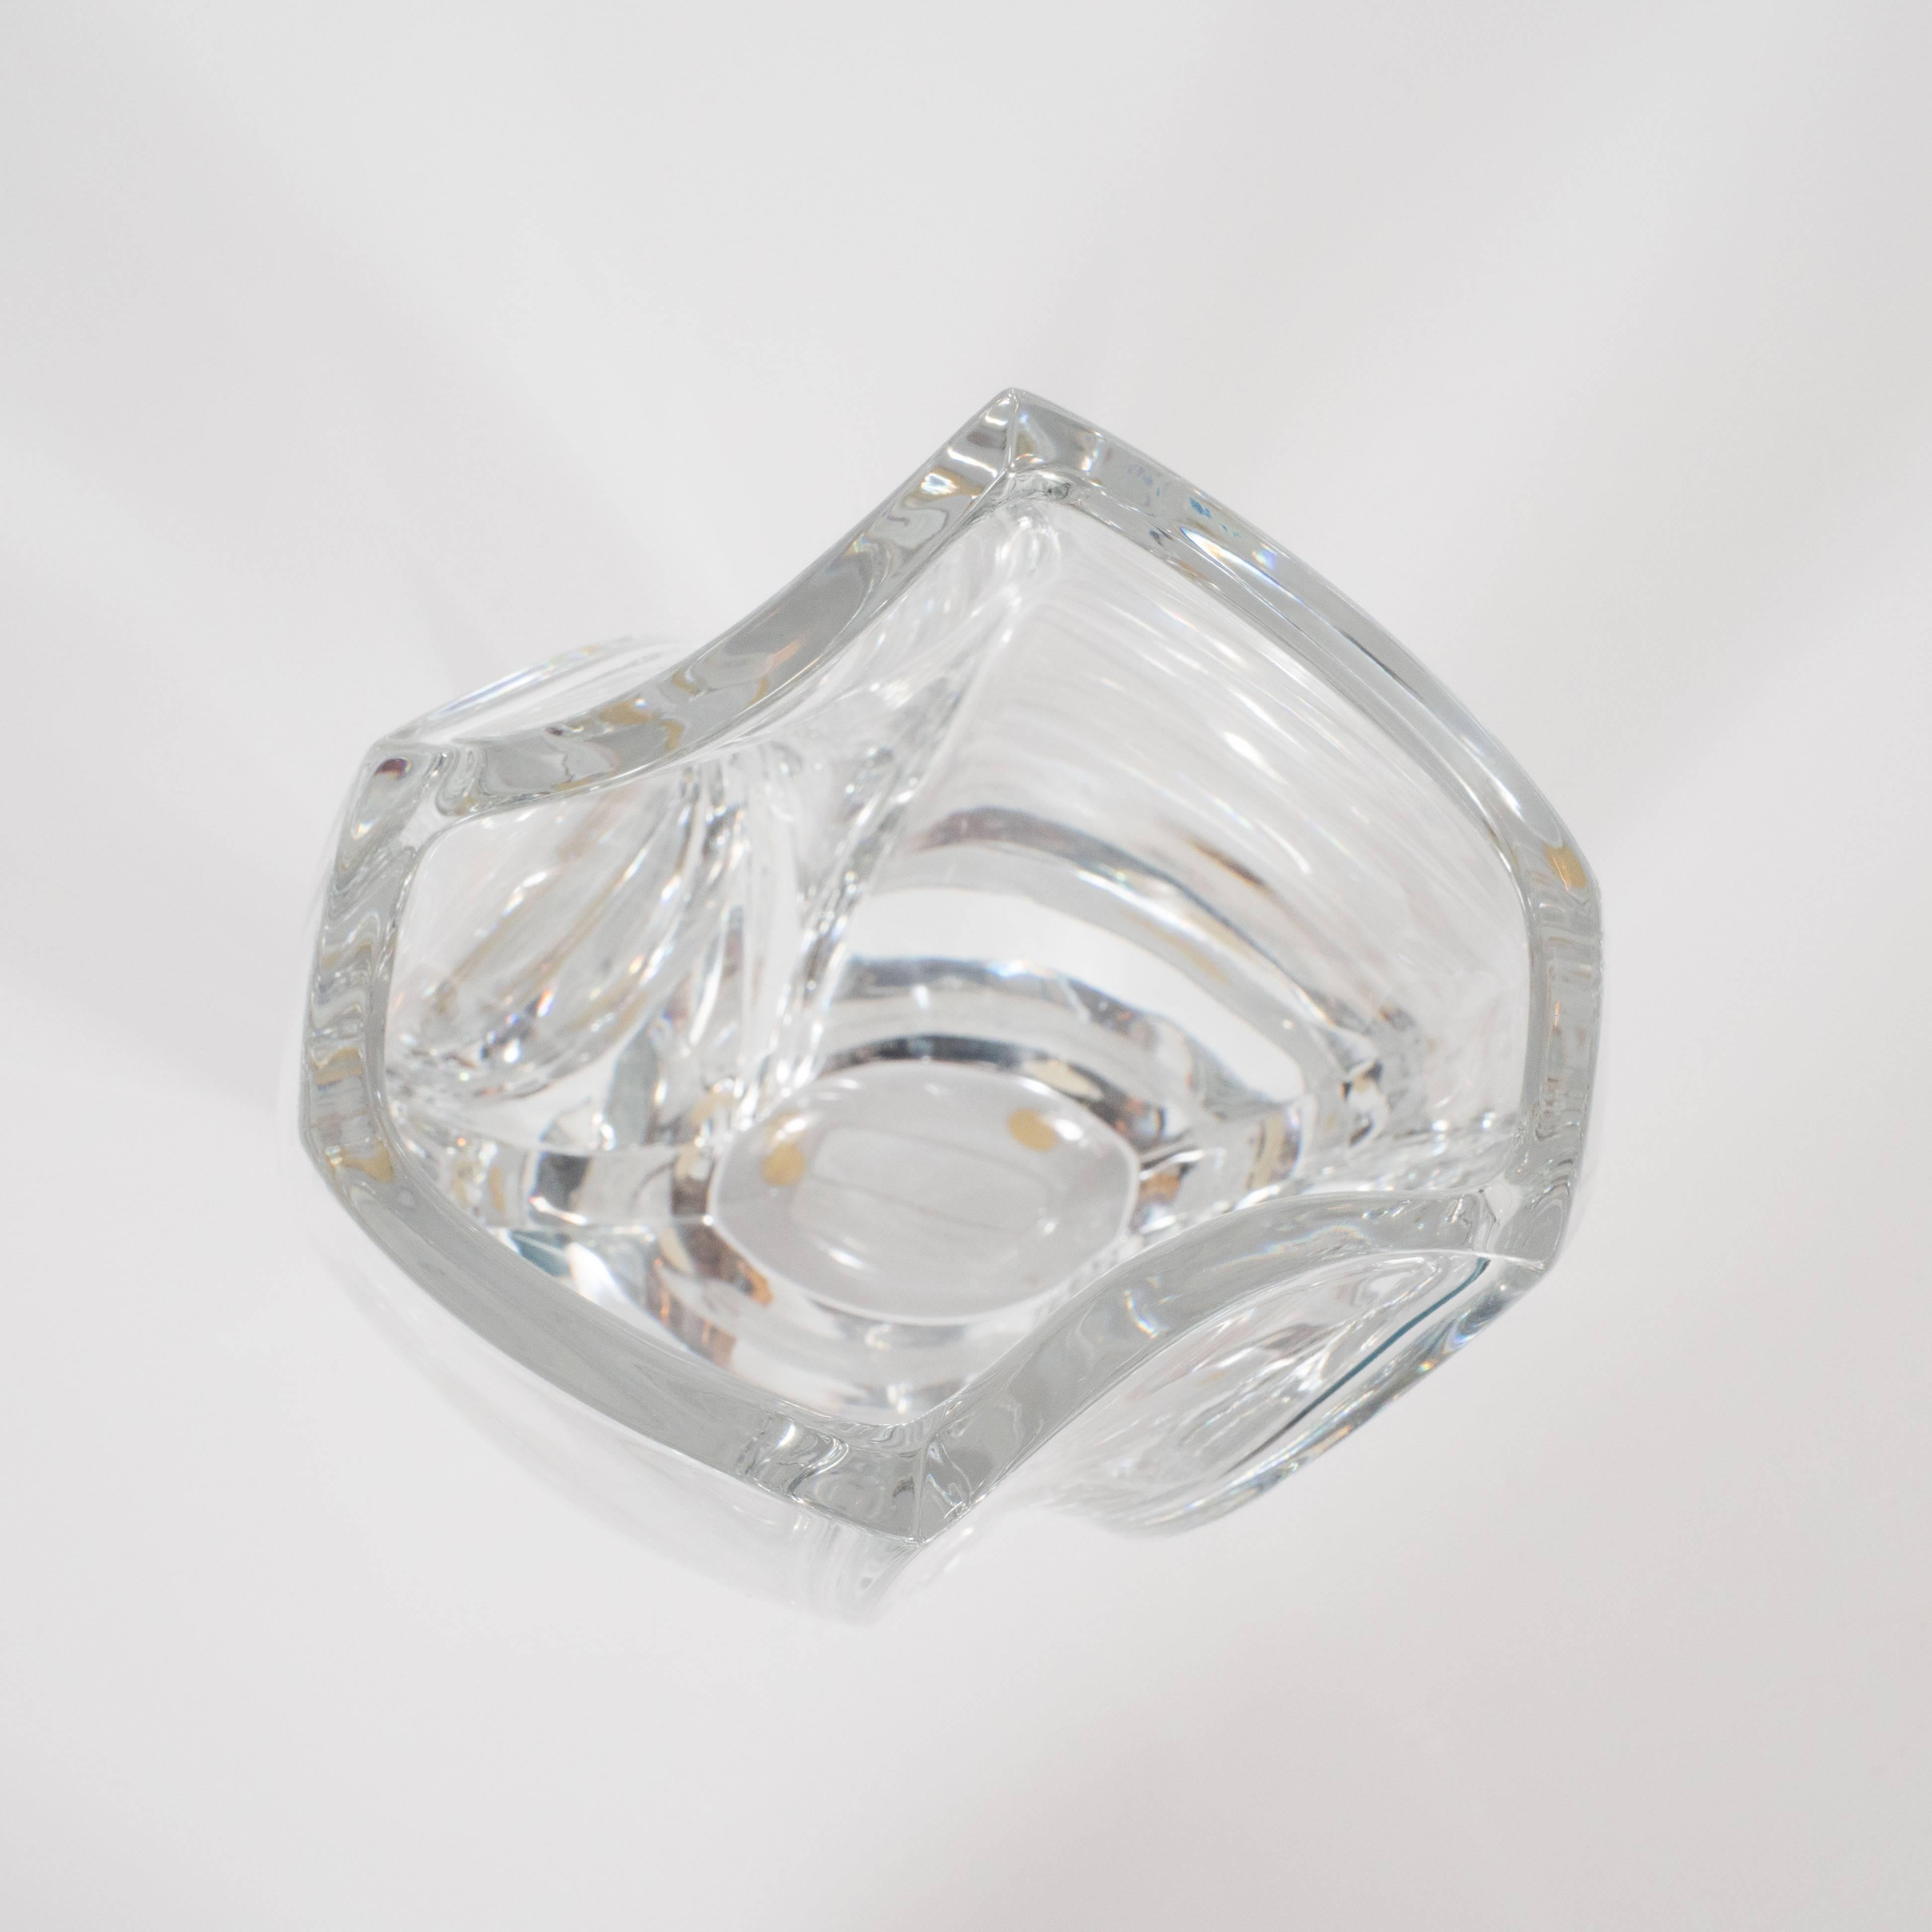 French Mid-Century Modern Hexagonal Translucent Glass Vase by Baccarat of France